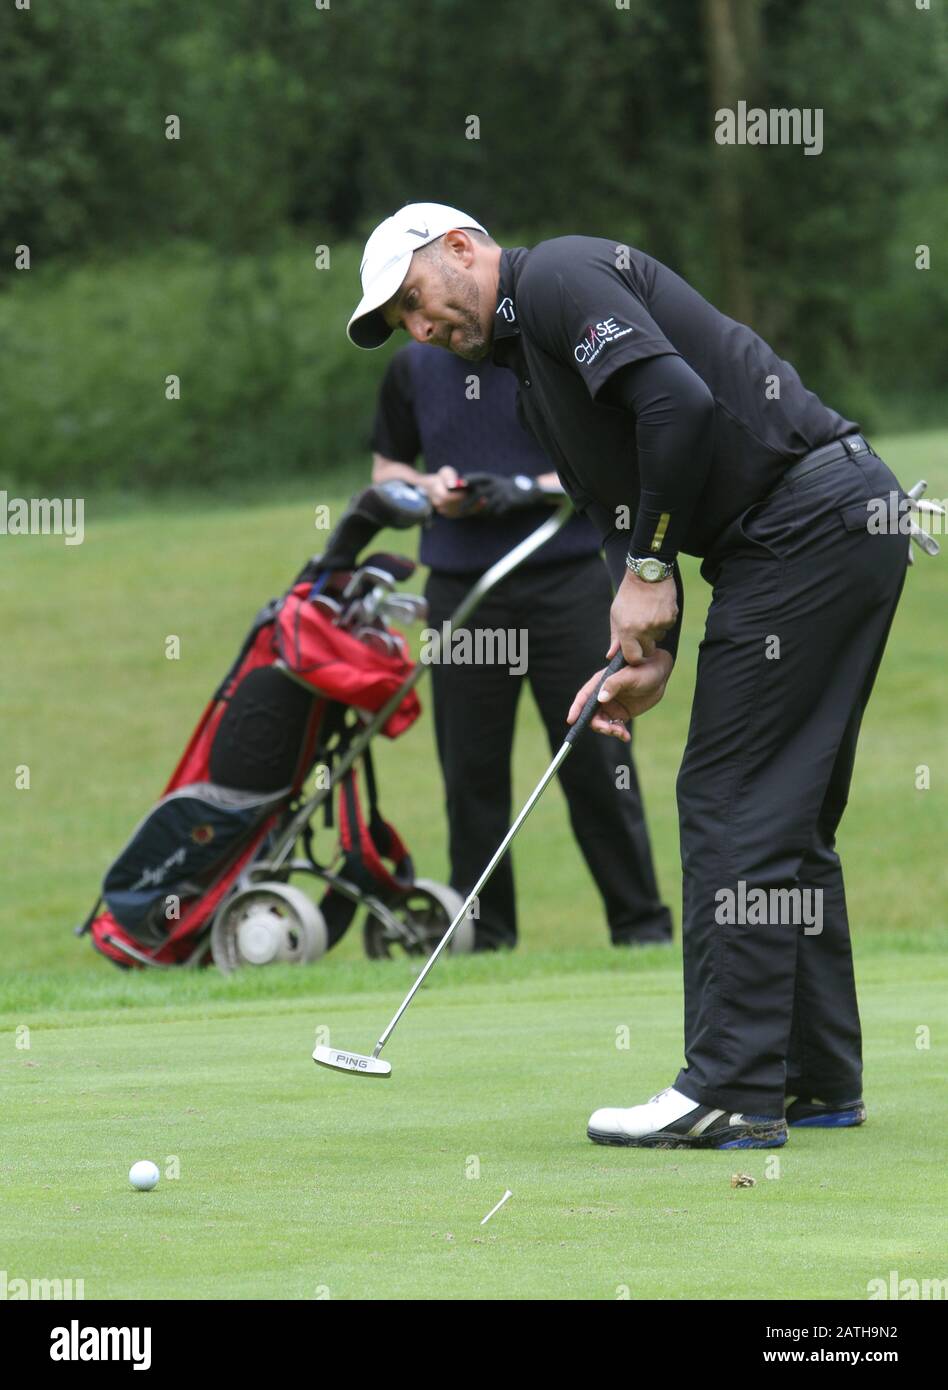 Mark Butcher competes at 'Golf with the Stars' held at Wentworth Golf club, Surrey, England. Stock Photo